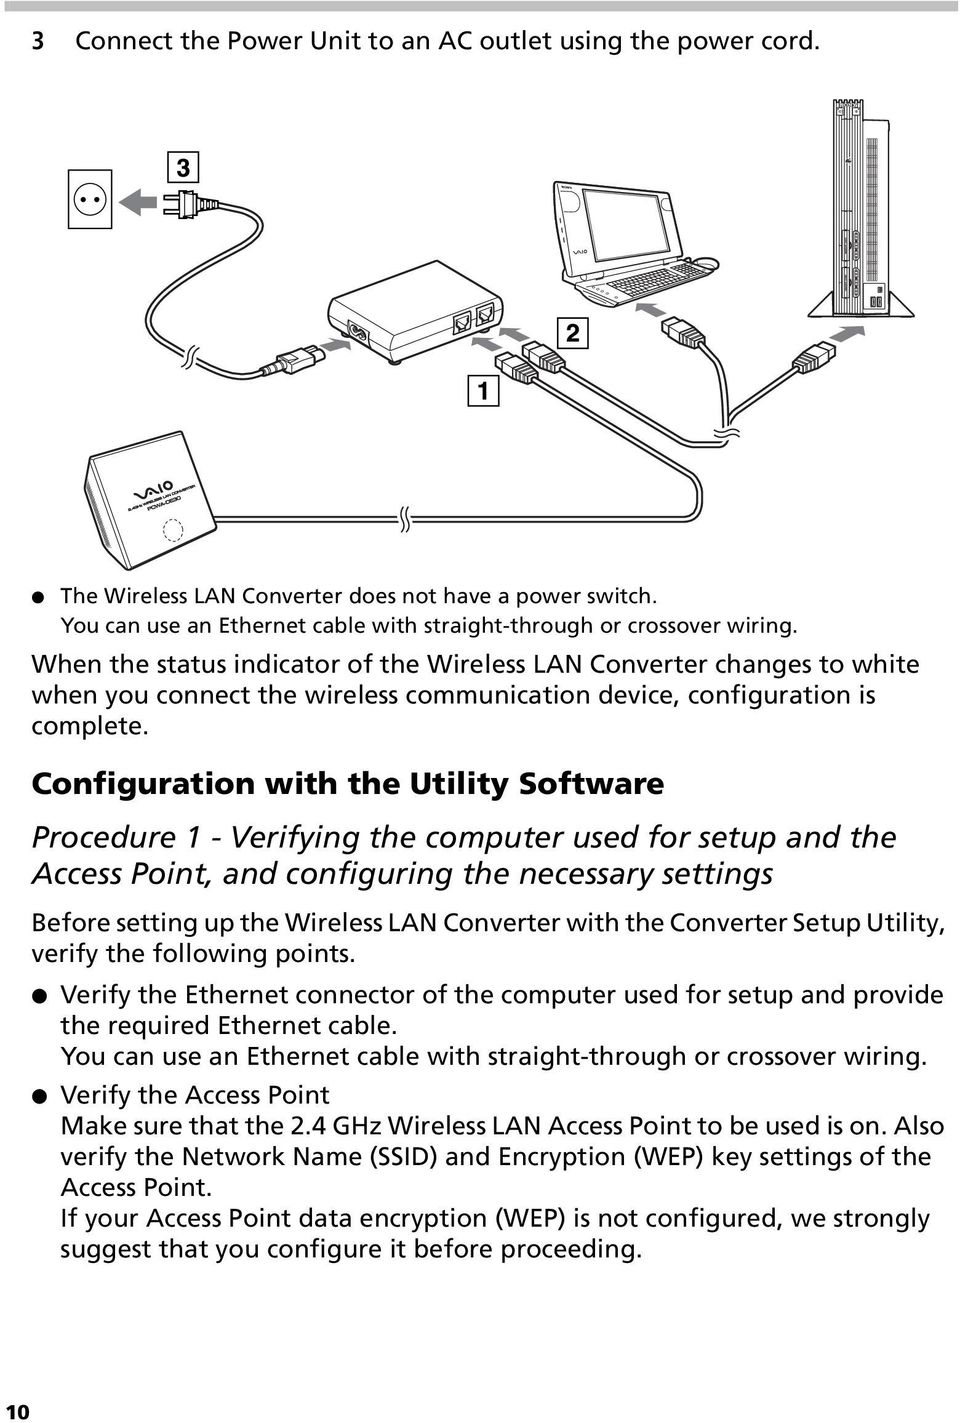 Configuration with the Utility Software Procedure 1 - Verifying the computer used for setup and the Access Point, and configuring the necessary settings Before setting up the Wireless LAN Converter